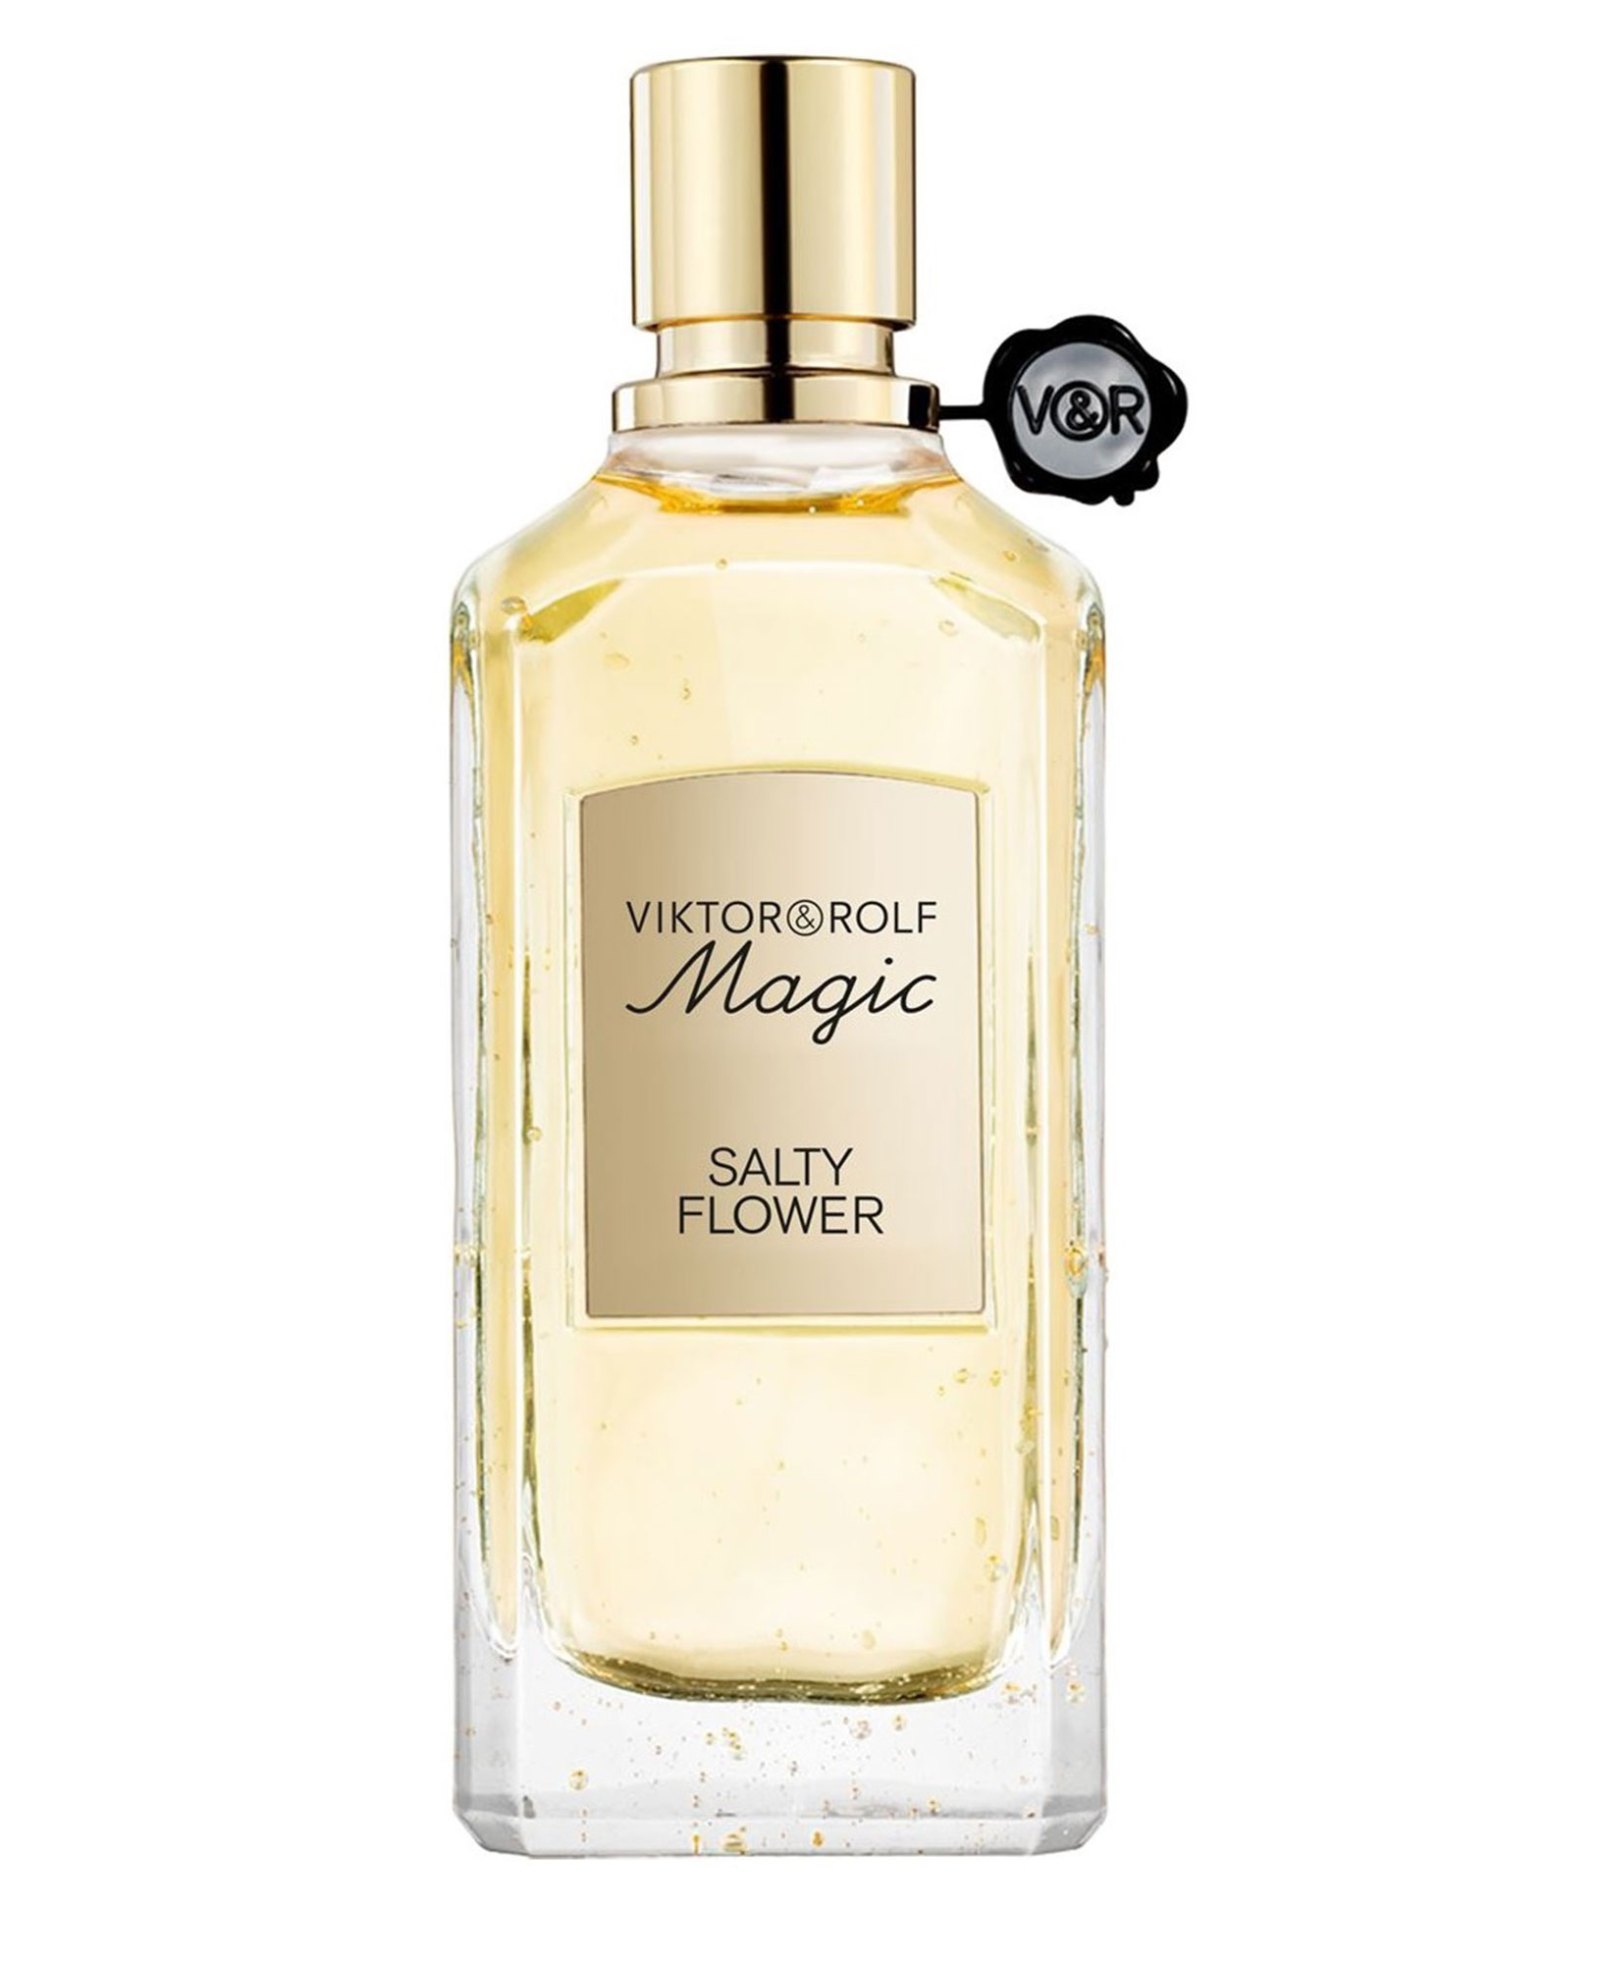 Celebrate National Fragrance Day with a New Scent